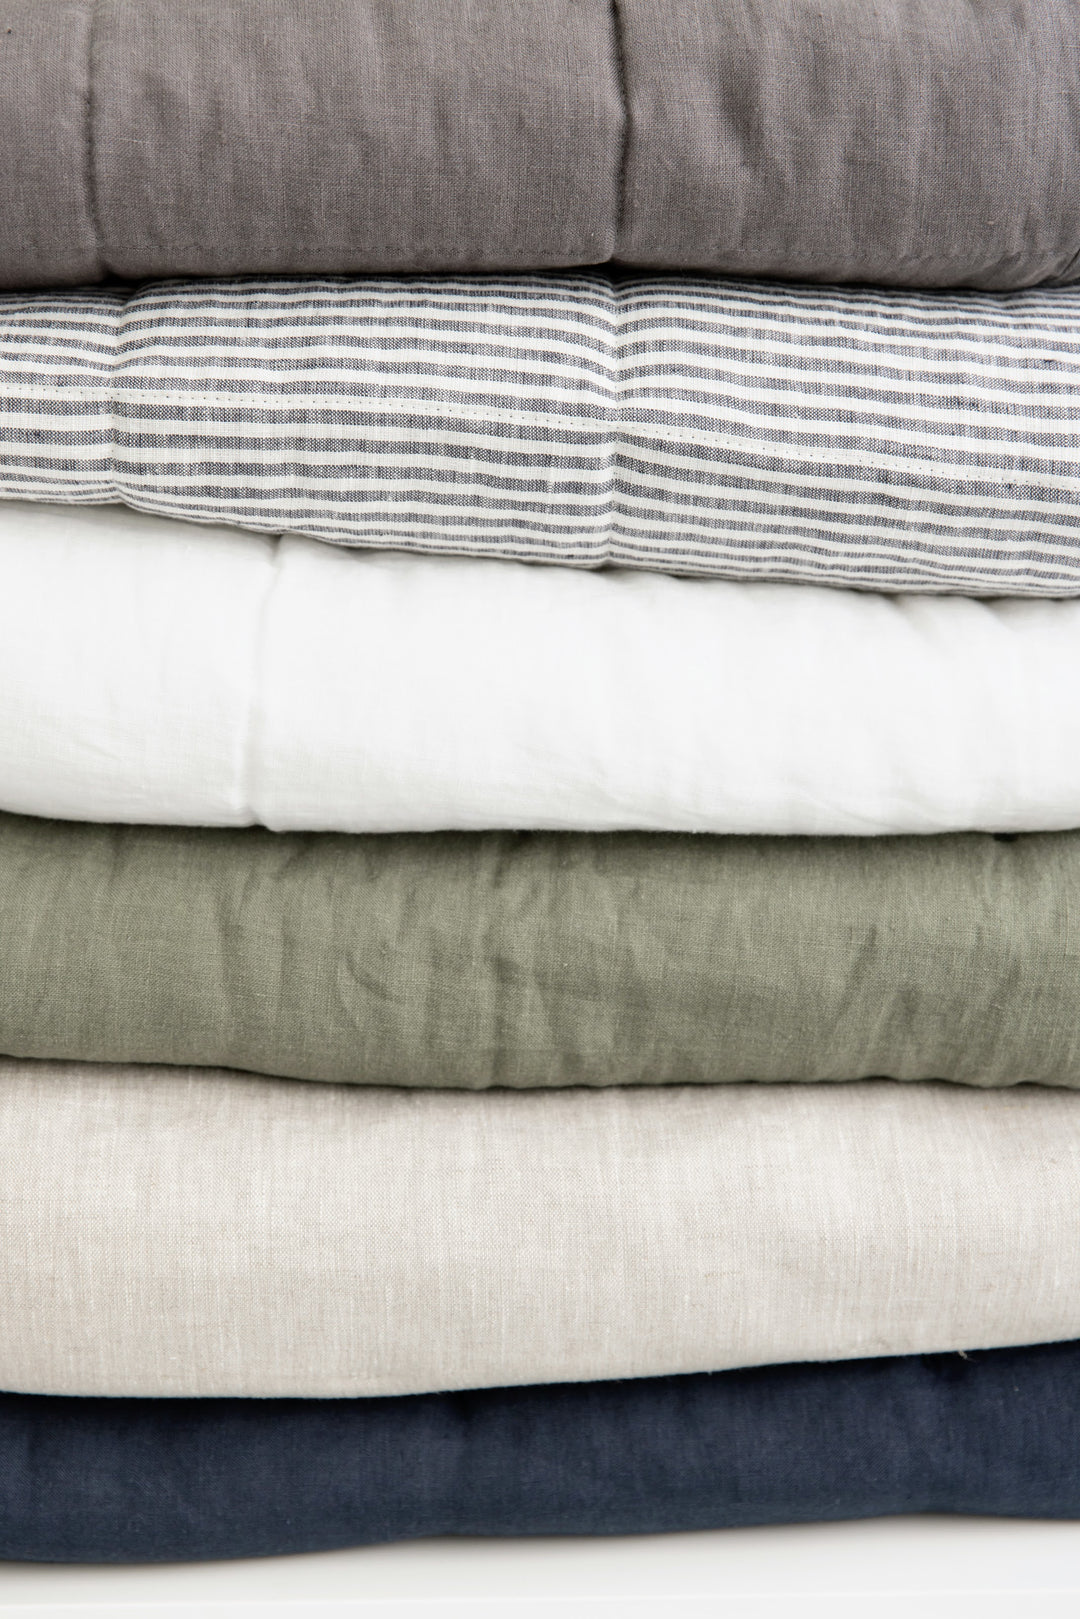 How To Care For Linen